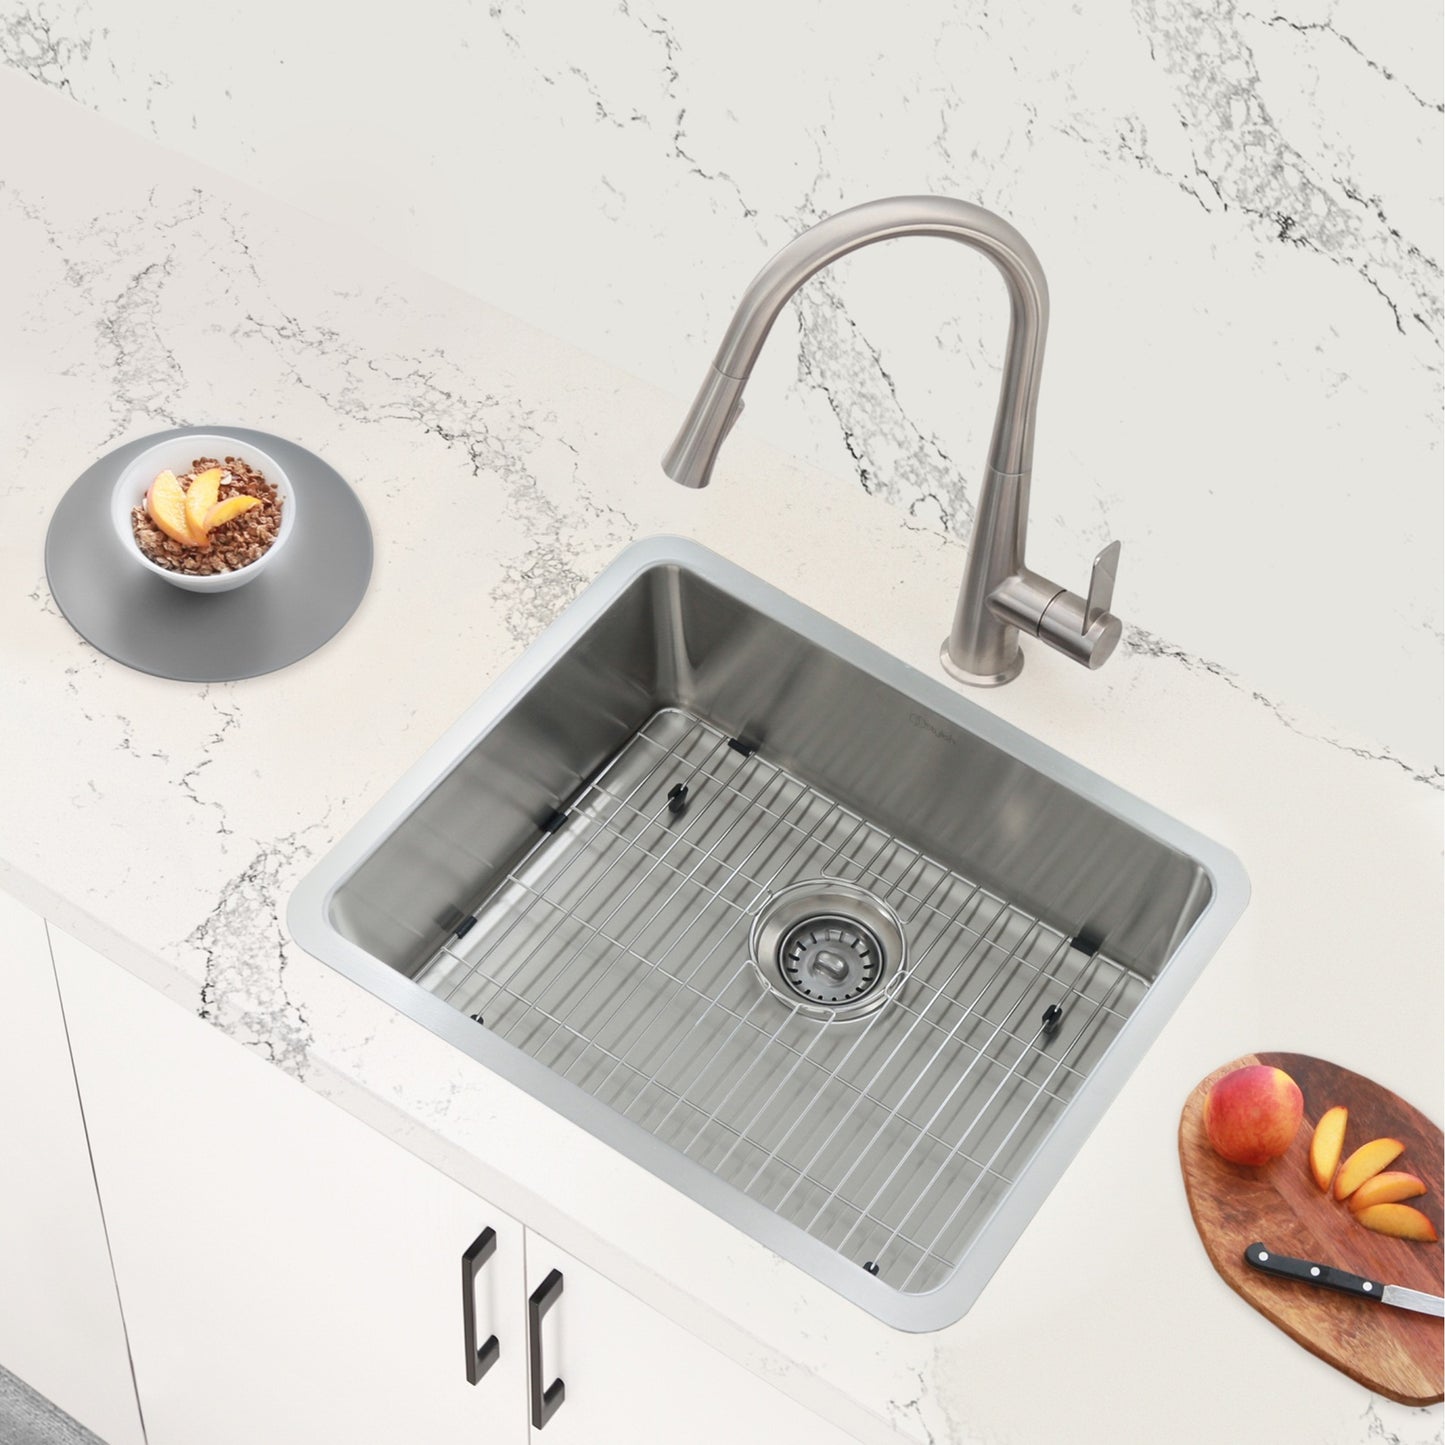 STYLISH 19" Palma Single Bowl Undermount and Drop-in Stainless Steel Kitchen Sink